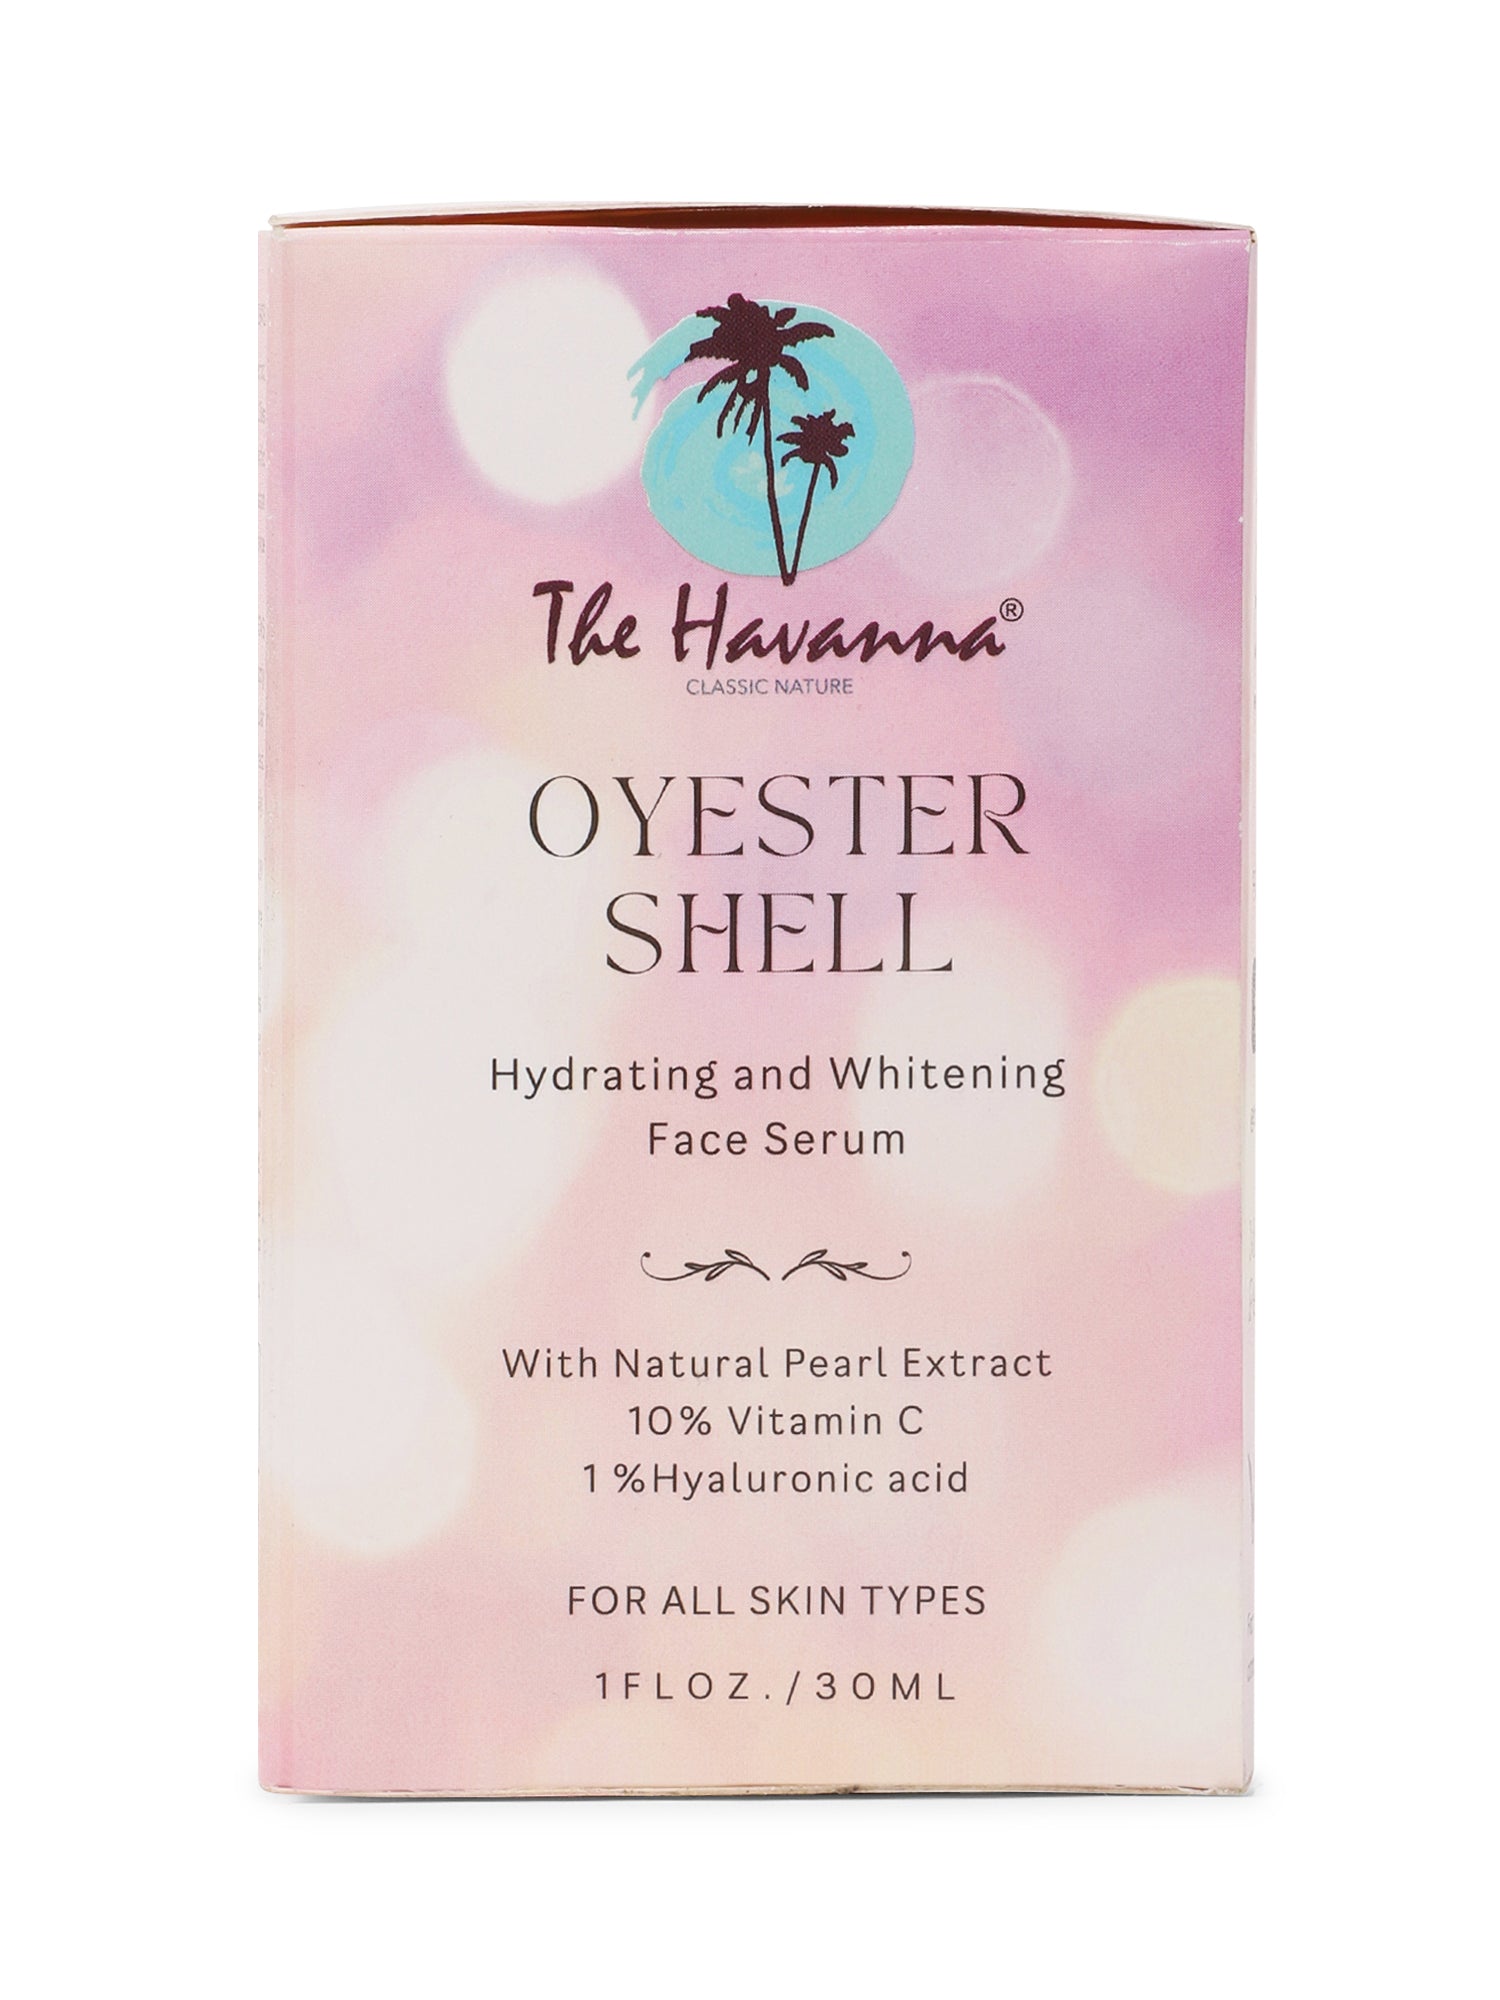 Hydrating and Whitening Oyster Shell Face Serum- The Havanna Classic Nature